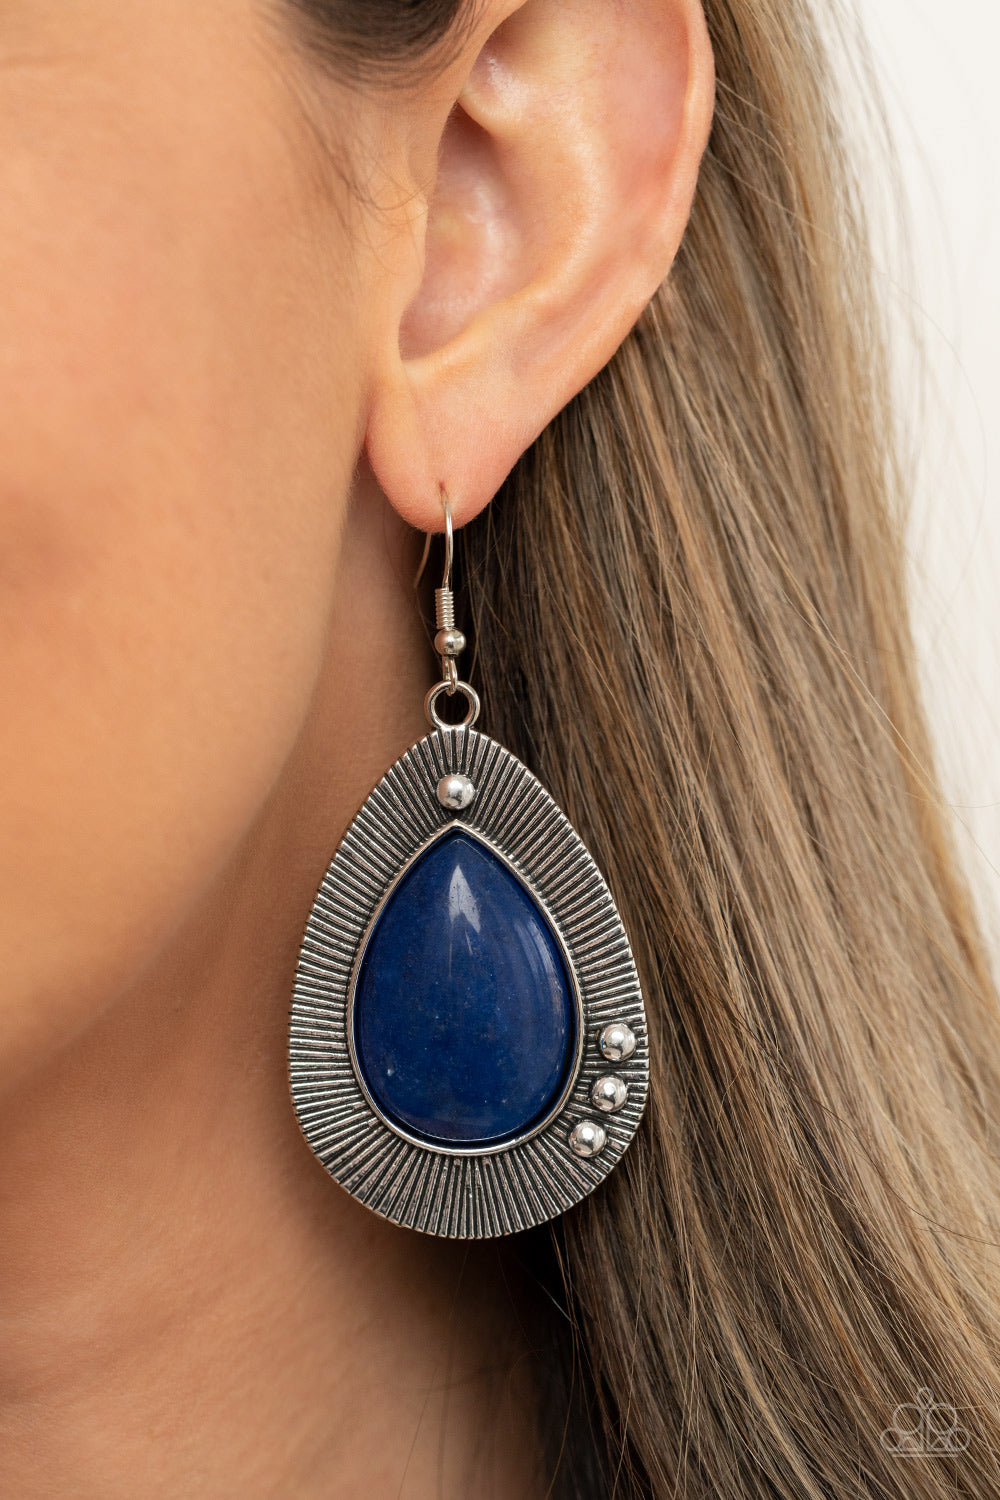 Western Fantasy Blue Earring - Paparazzi Accessories  Chiseled into a tranquil teardrop, a shimmery French Blue stone bead is pressed into the center of a rustically studded silver frame radiating with antiqued detail for a southwestern flair. Earring attaches to a standard fishhook fitting.  All Paparazzi Accessories are lead free and nickel free!  Sold as one pair of earrings.